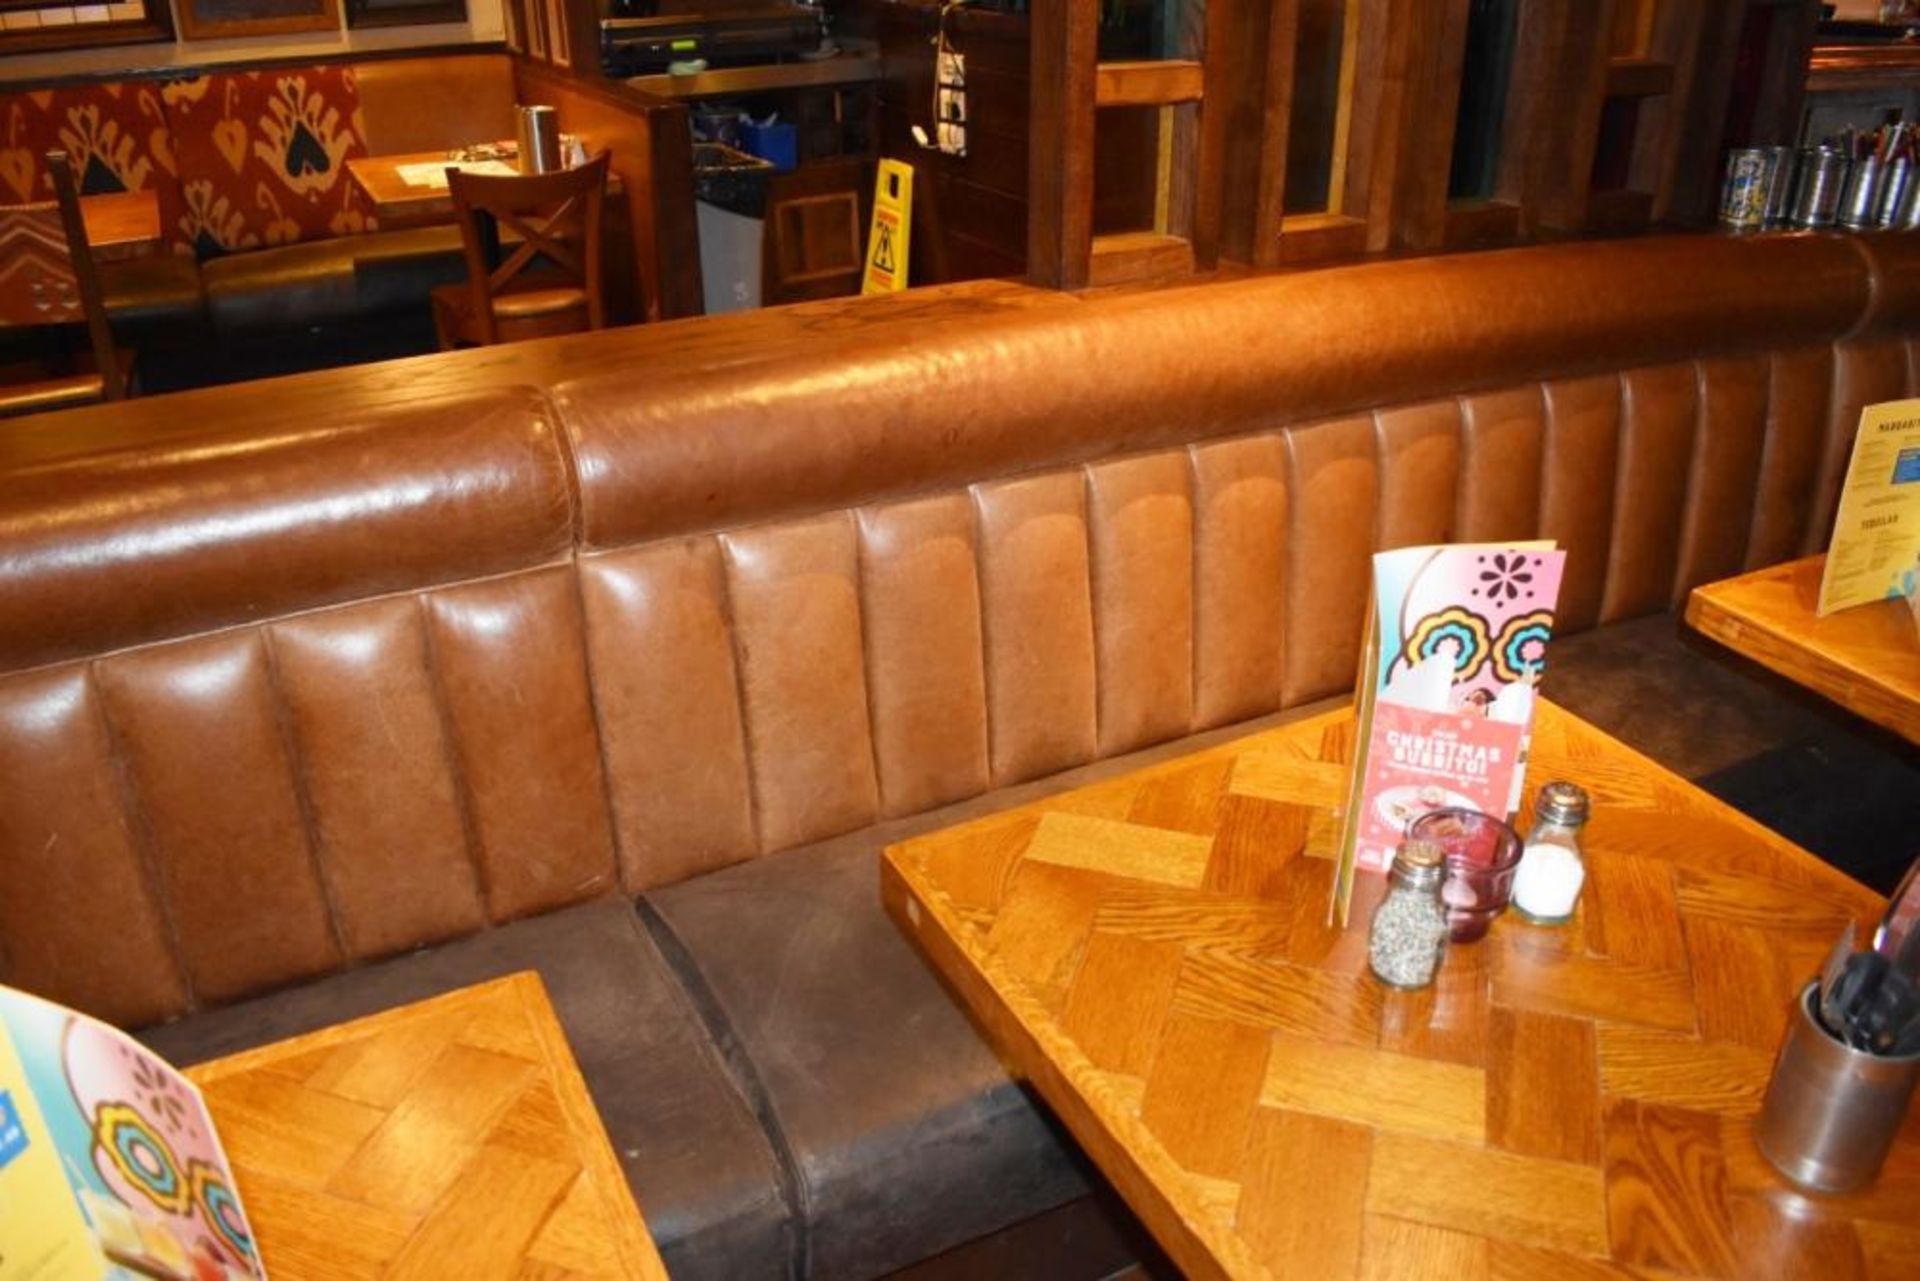 1 x Long Curved Seating Bench From Mexican Themed Restaurant - CL461 - Ref PR891 - Location: London - Image 11 of 14